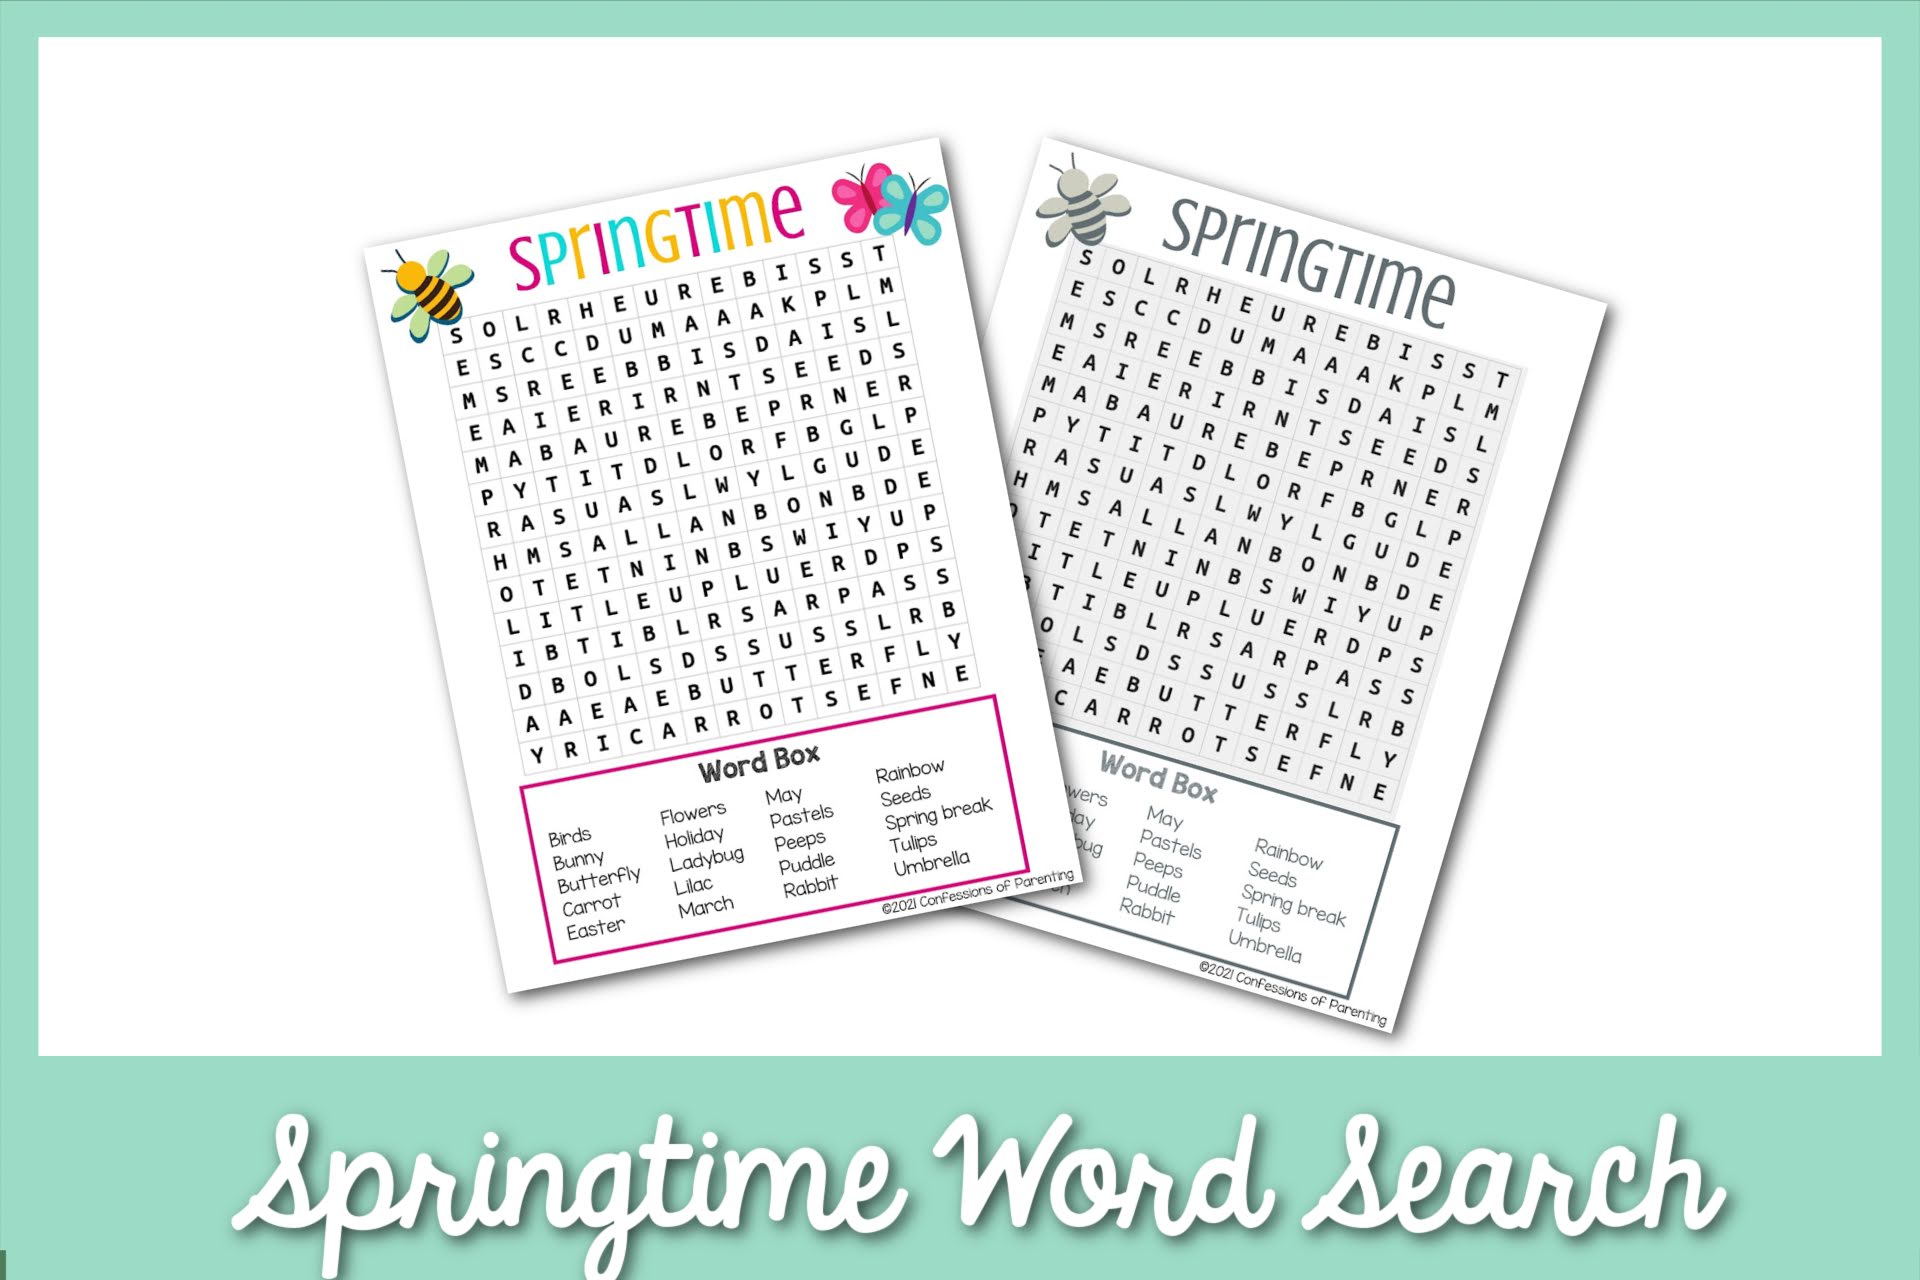 feature image: springtime word search on a blue background